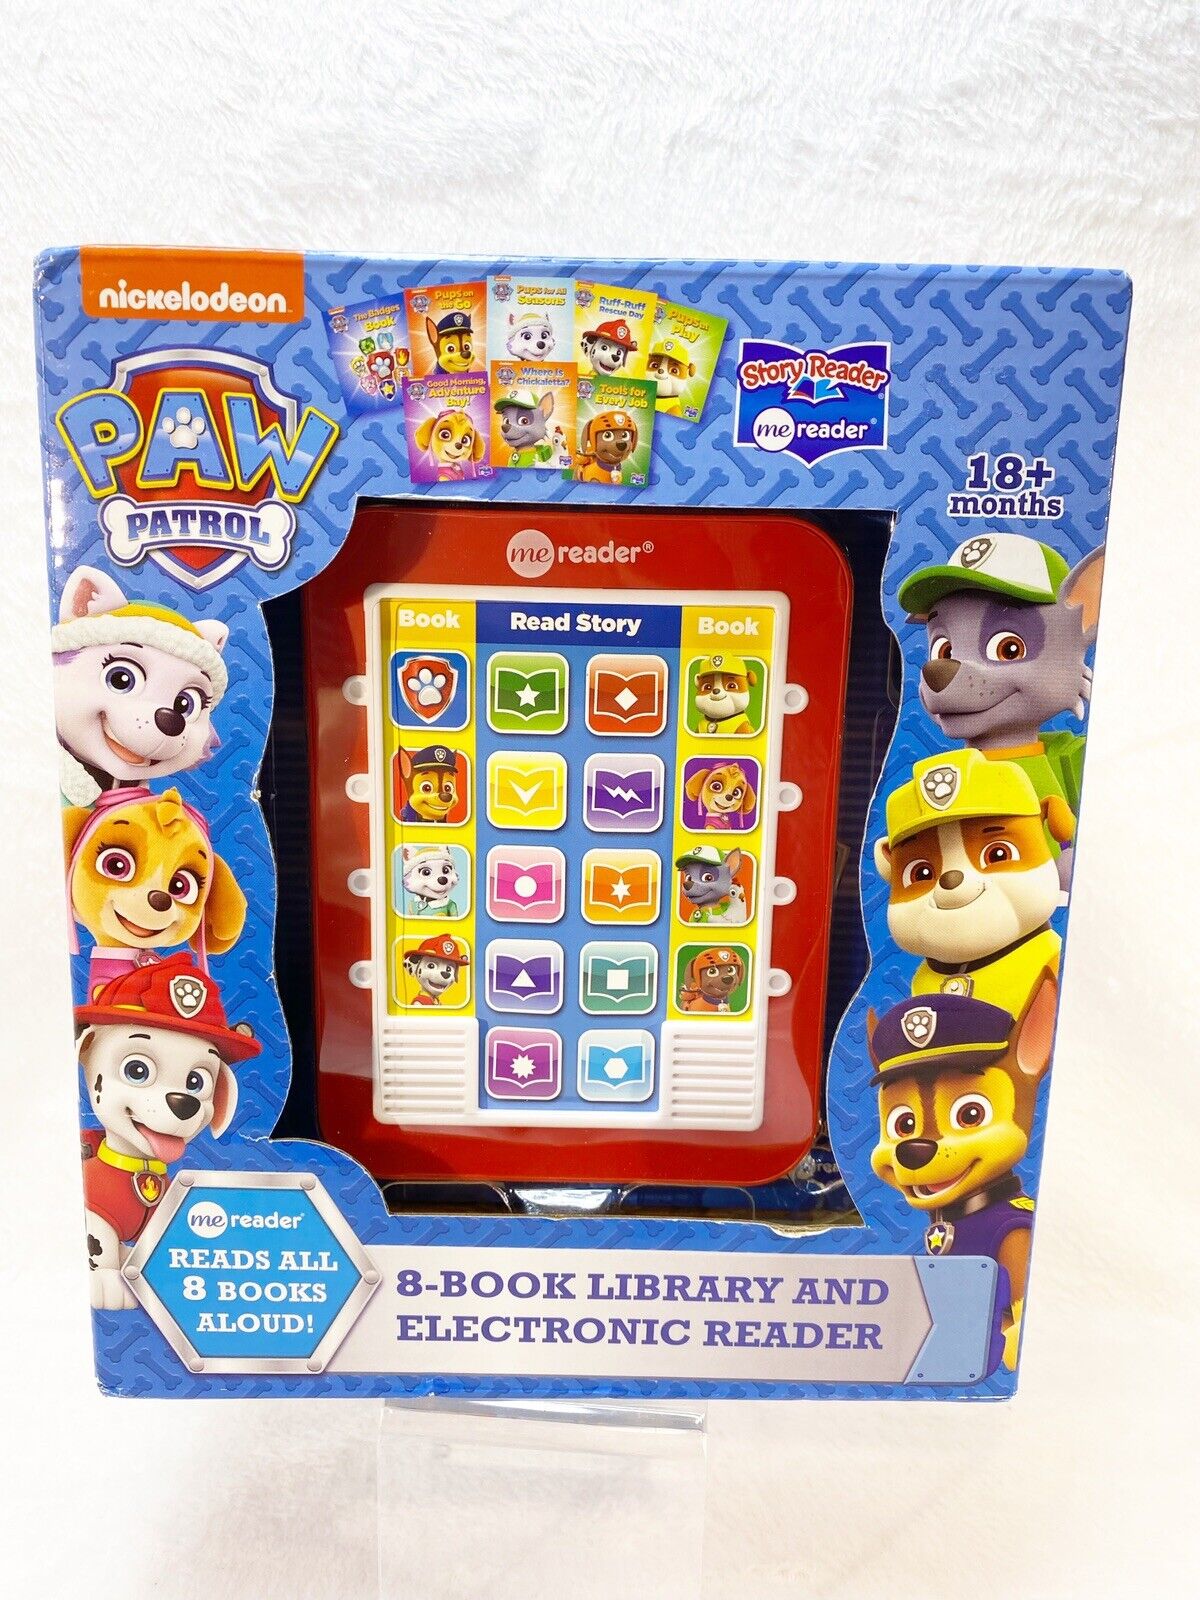 Nickelodeon - Paw Patrol Me Reader Electronic Reader and 8-Book Library - PI Kid